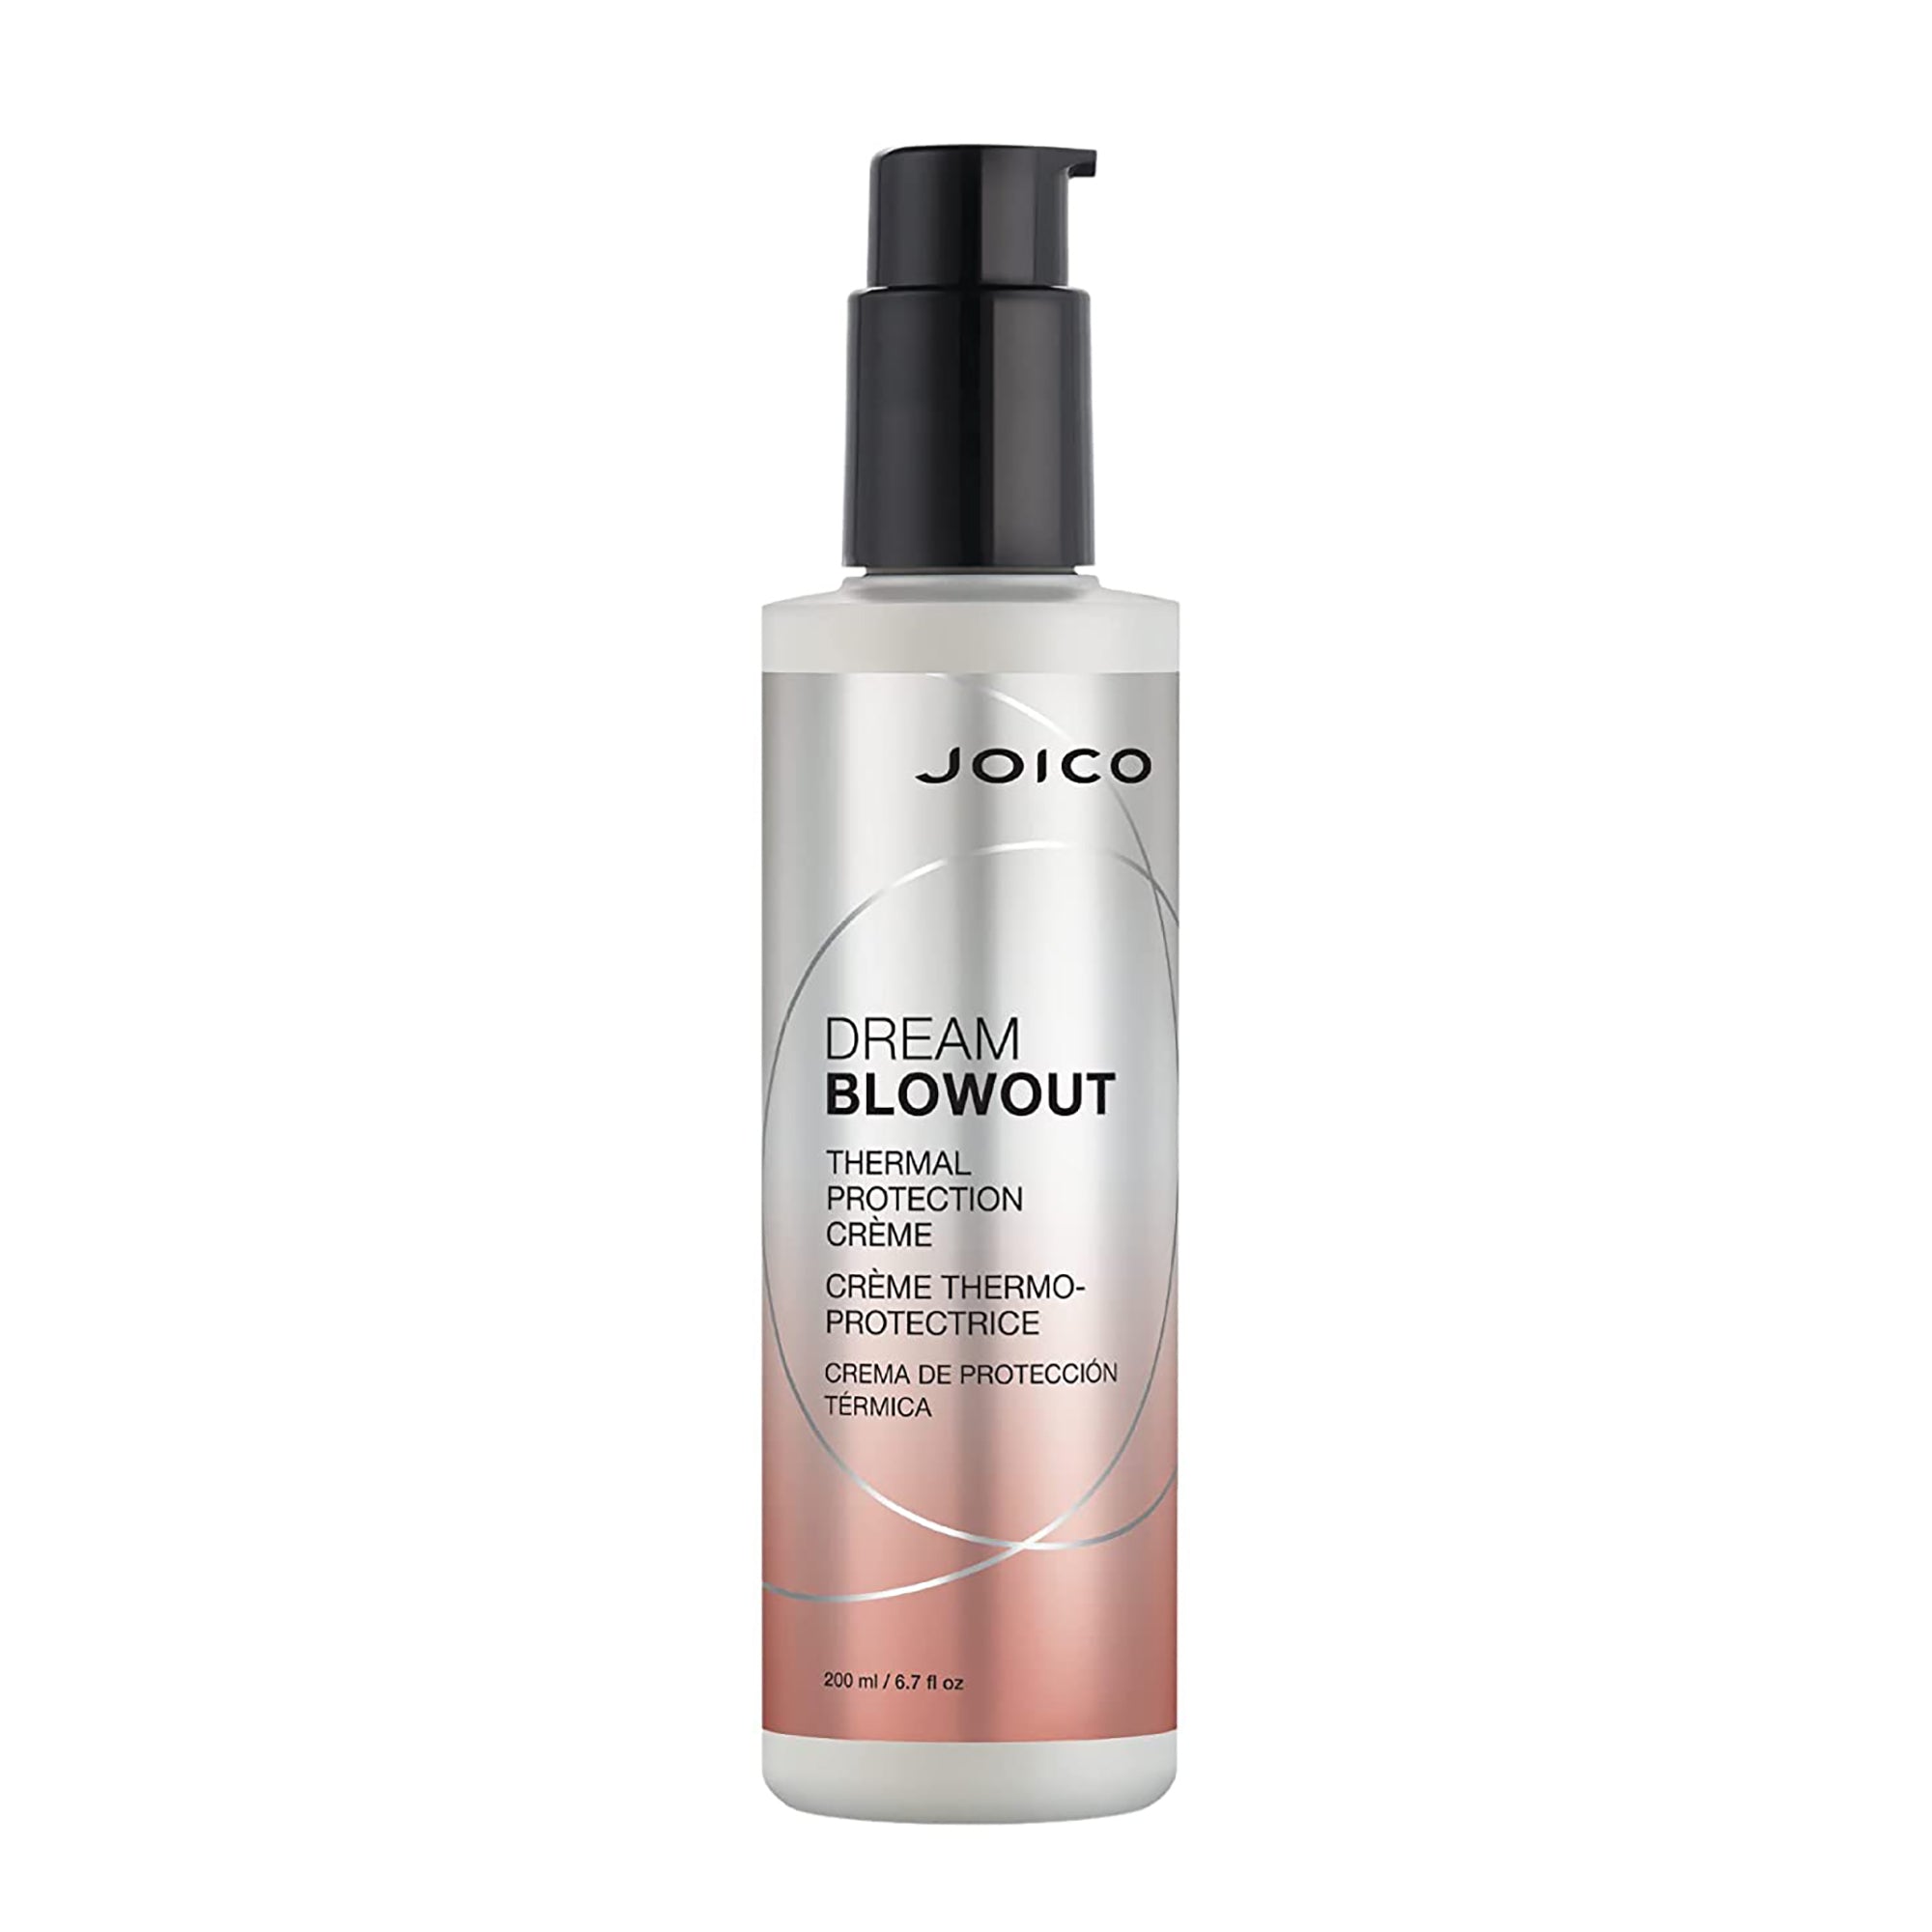 Joico Dream Blowout Thermal Protection Creme / 6.7OZ